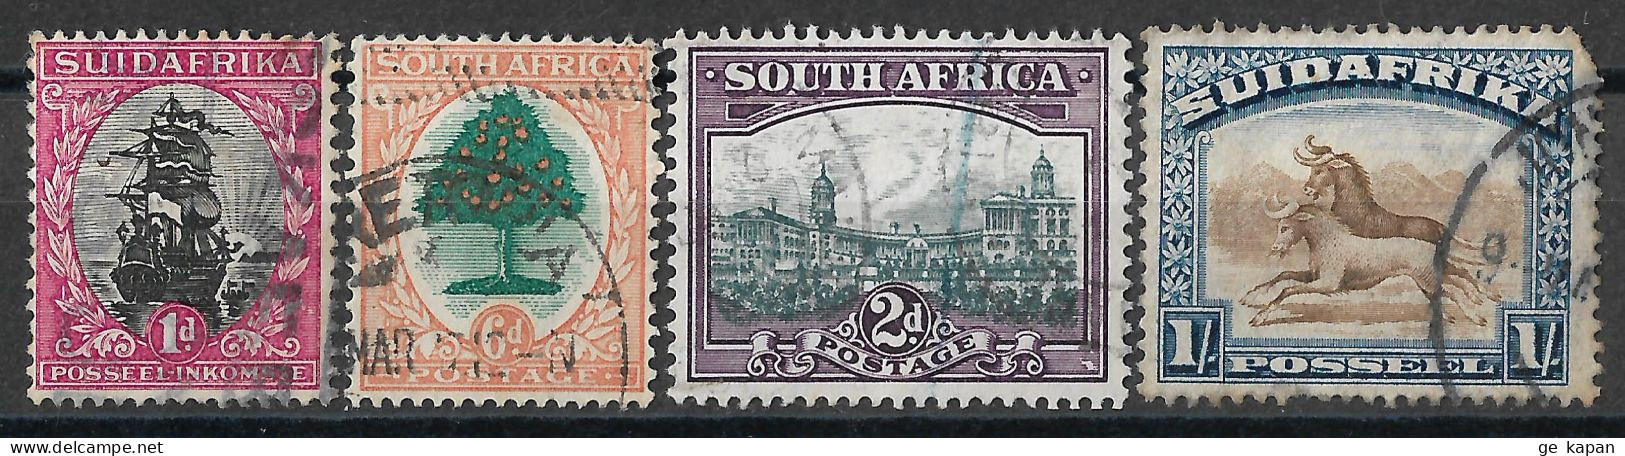 1926-1931 SOUTH AFRICA Set Of 4 USED STAMPS (Scott # 24b,25a,36a,43b) CV $3.95 - Used Stamps